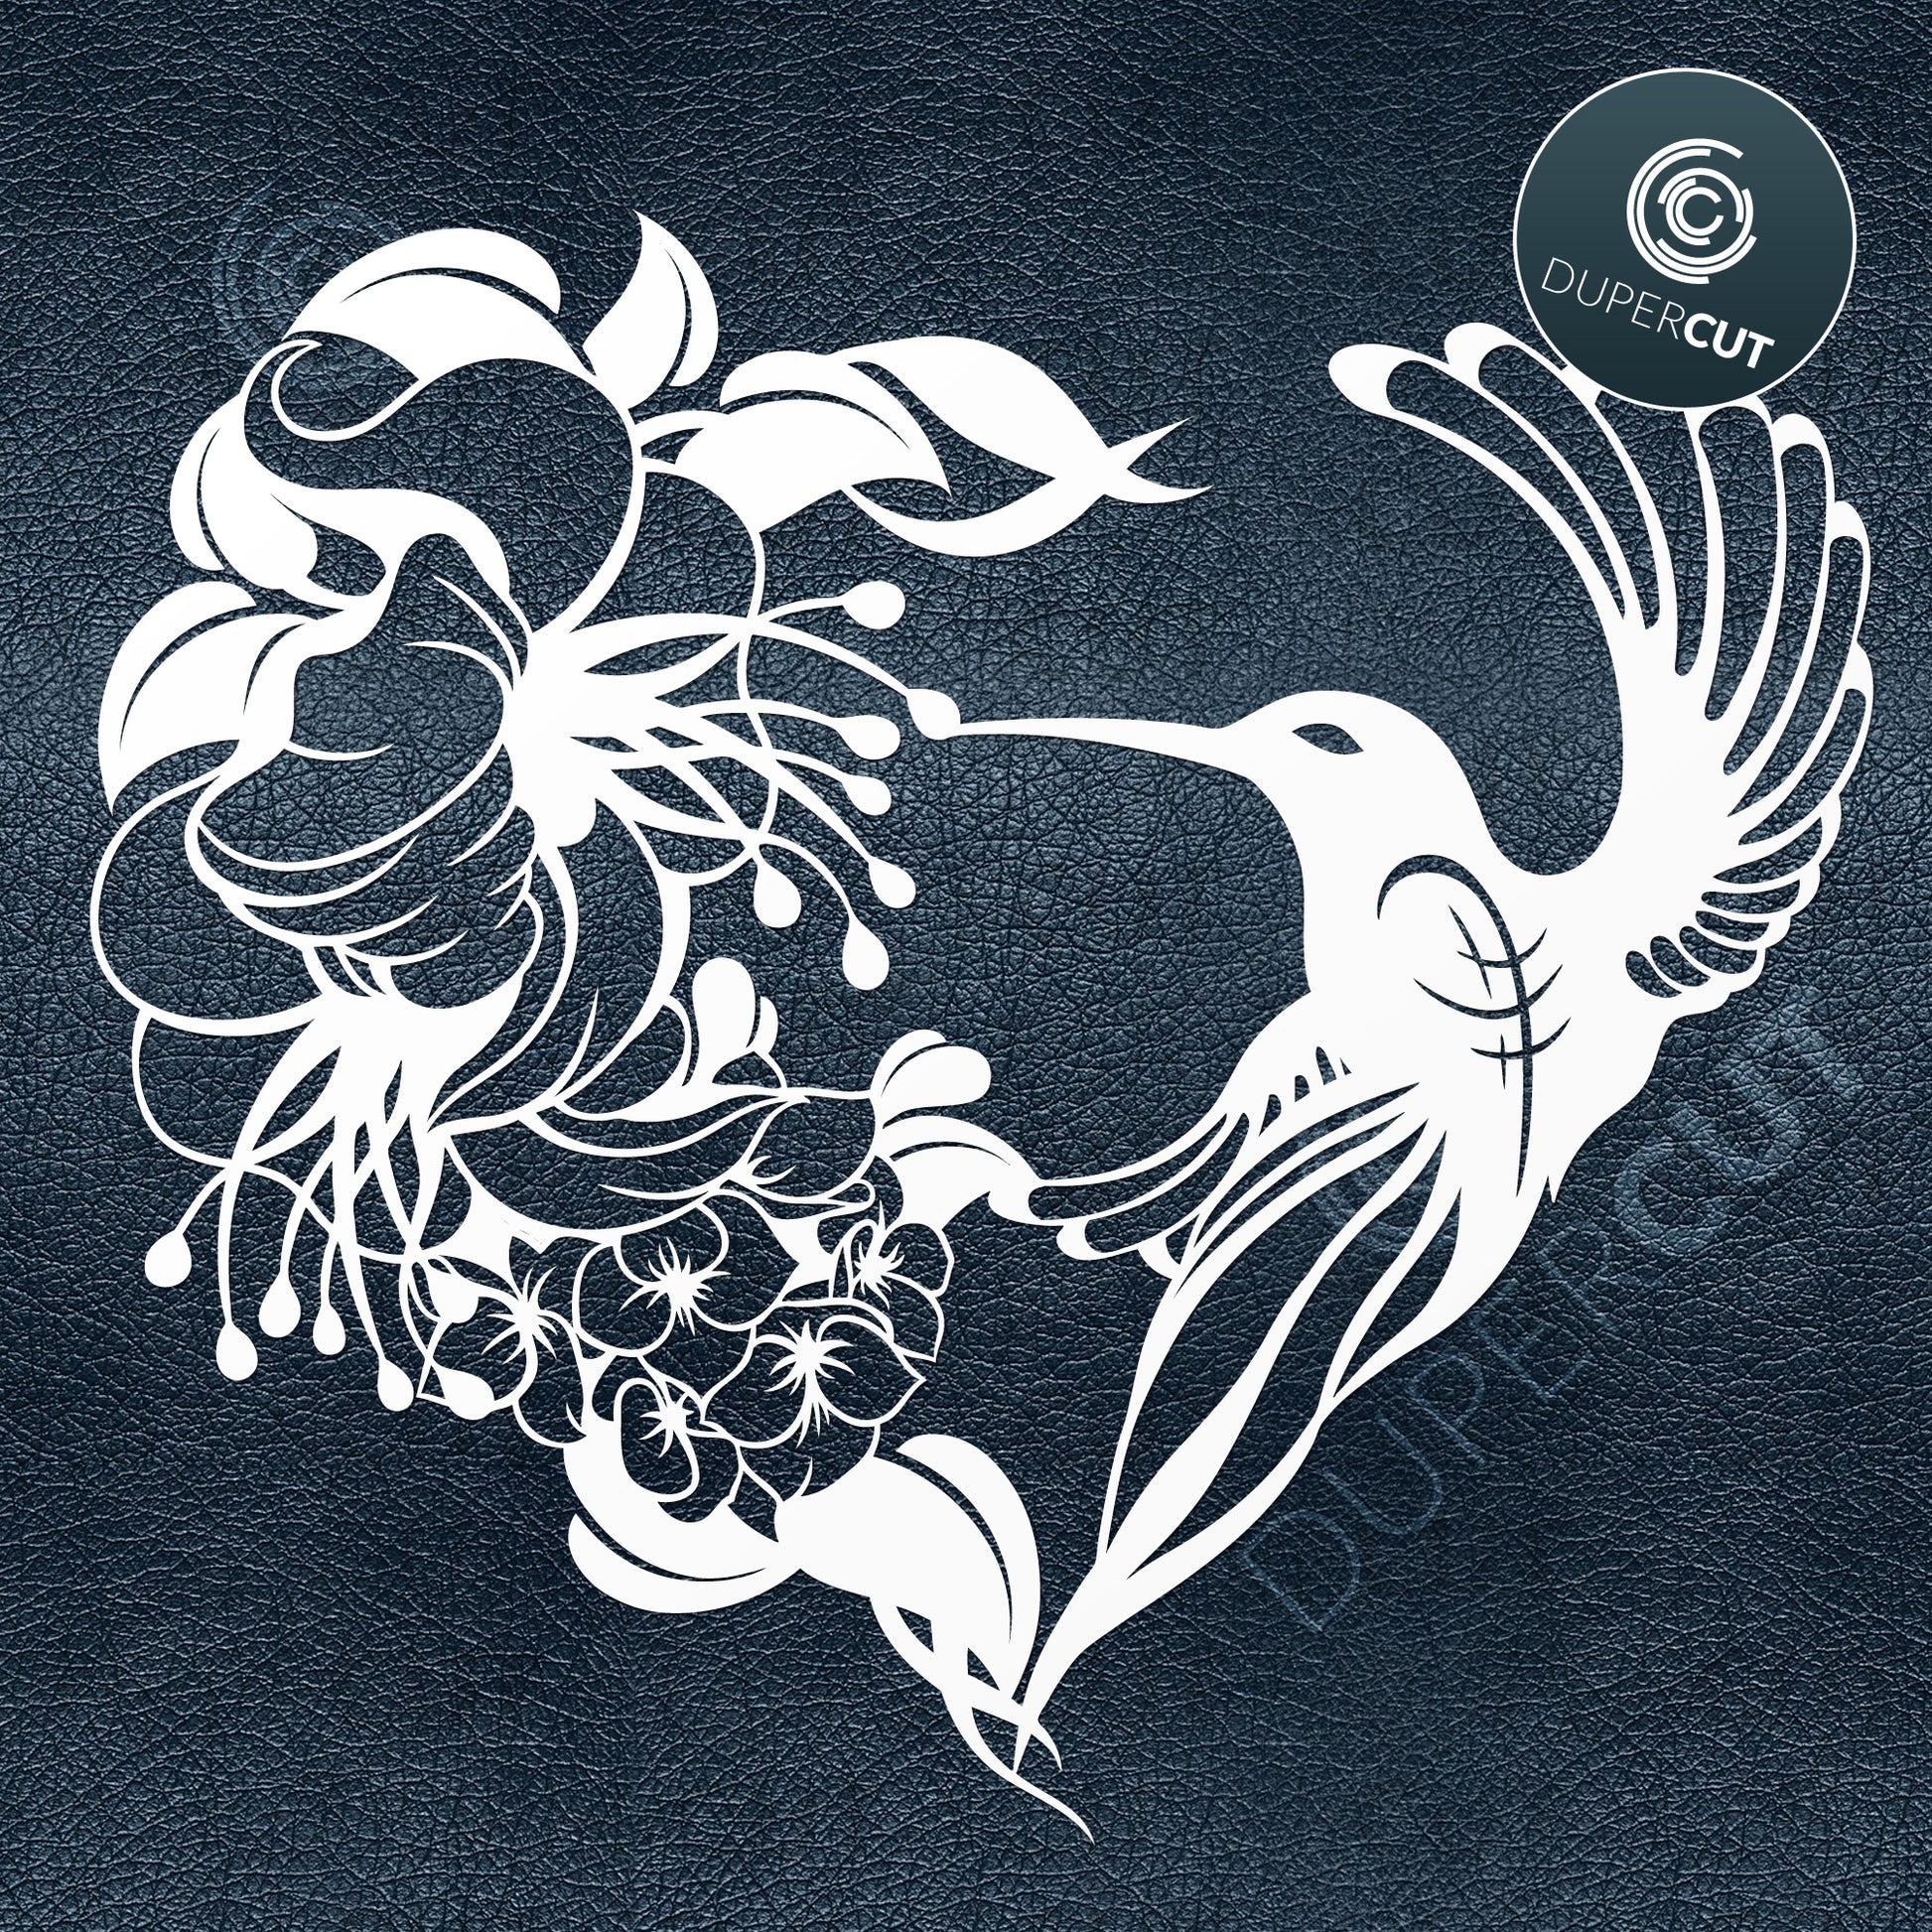 Hummingbird with flowers in shape of heart. Papercutting template for commercial use. SVG files for Silhouette Cameo, Cricut, Glowforge, DXF for CNC, laser cutting, print on demand